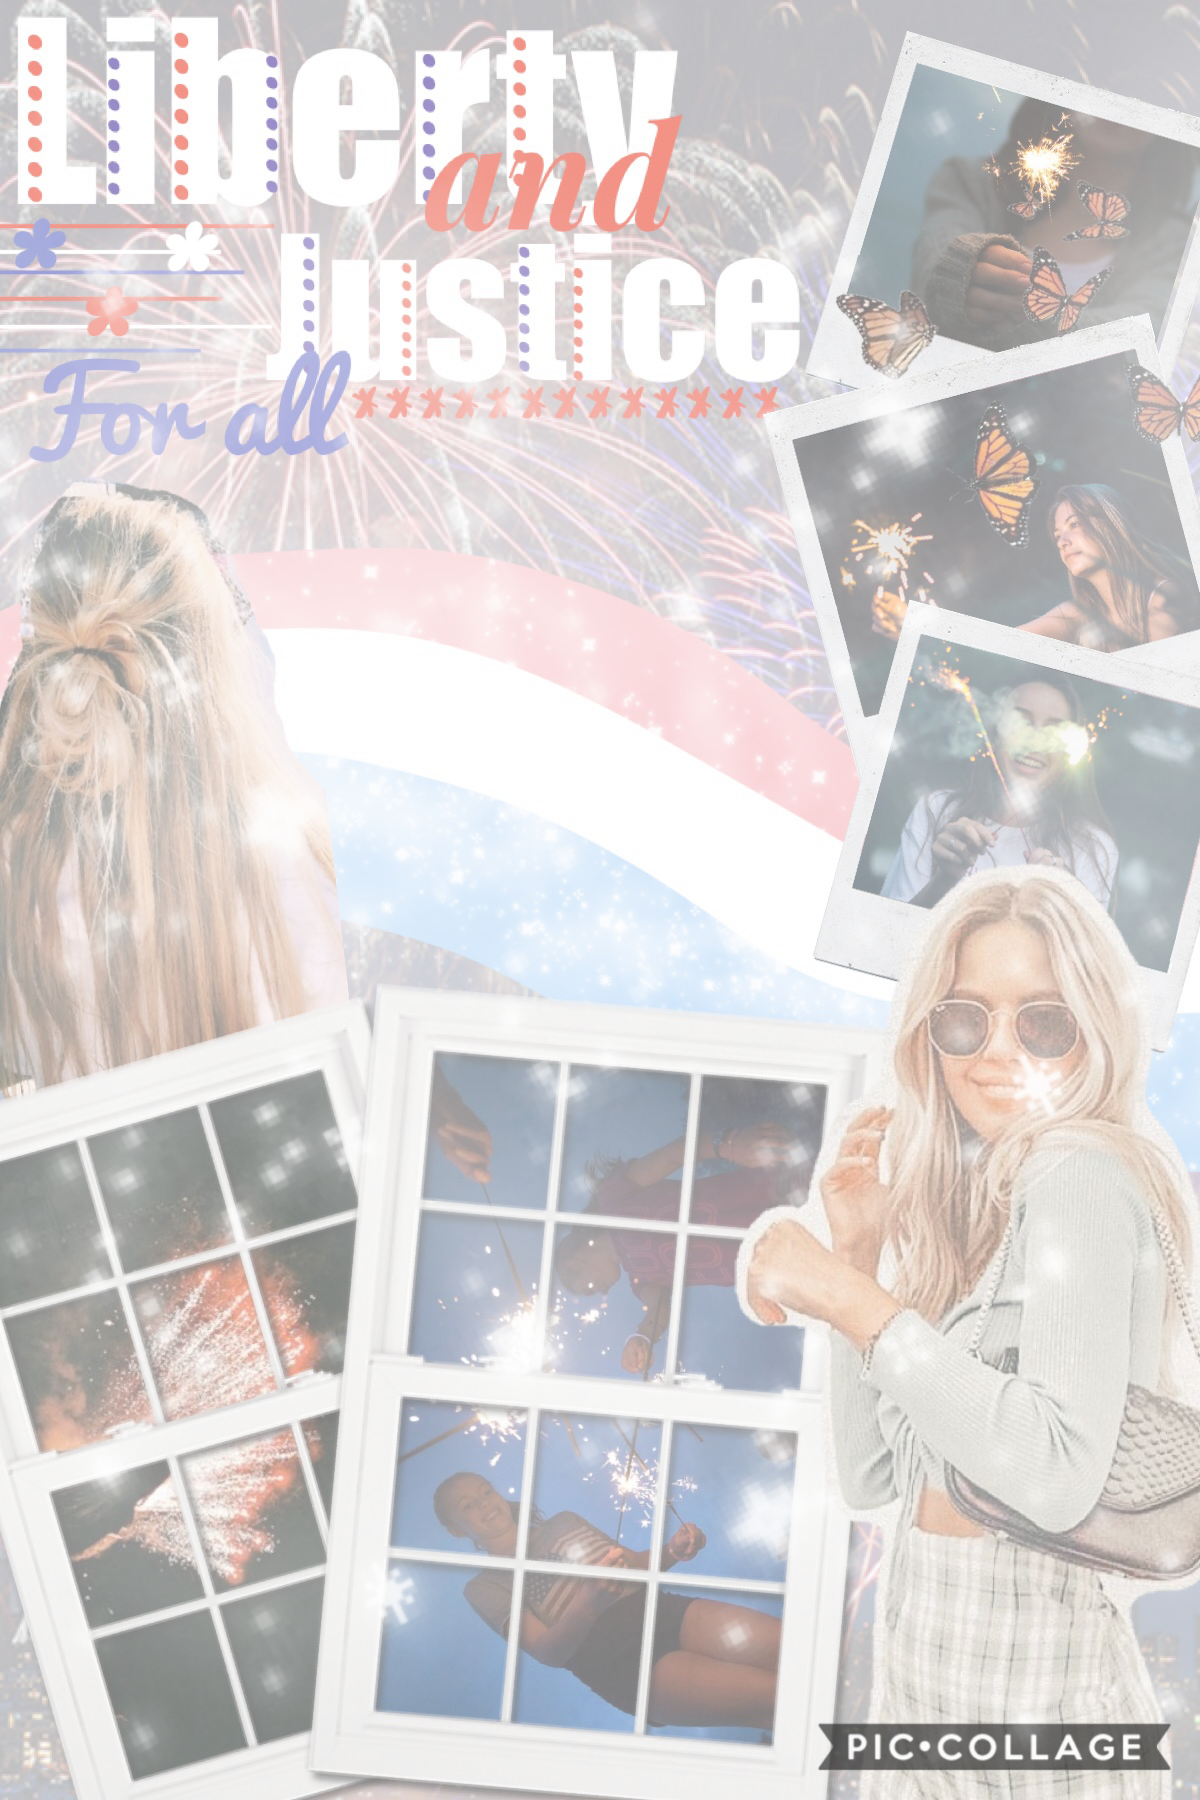 Happy 4th of July everyone!! T a p
Go enter my icon contest if you haven’t yet please! I hope all of y’all have a wonderful 4th!!